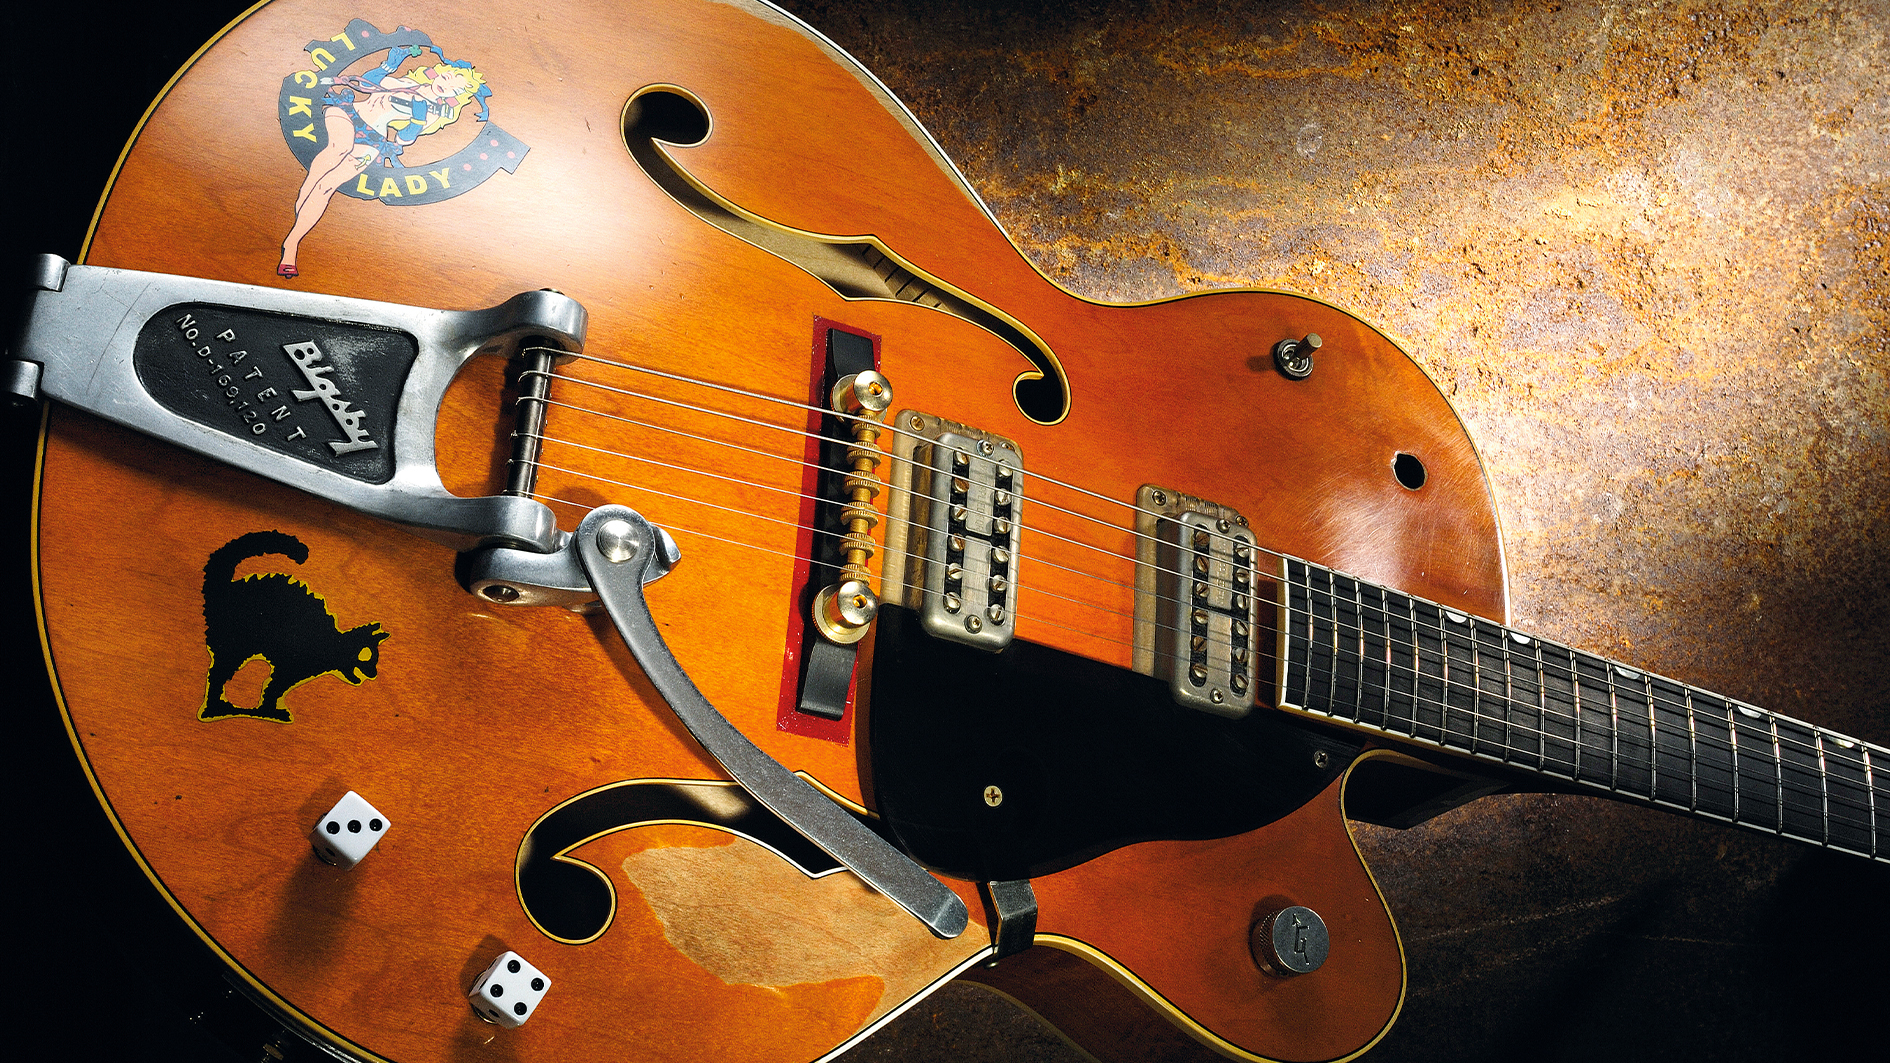 The Gretsch G6120: the story of a rock 'n' roll icon | Guitar World